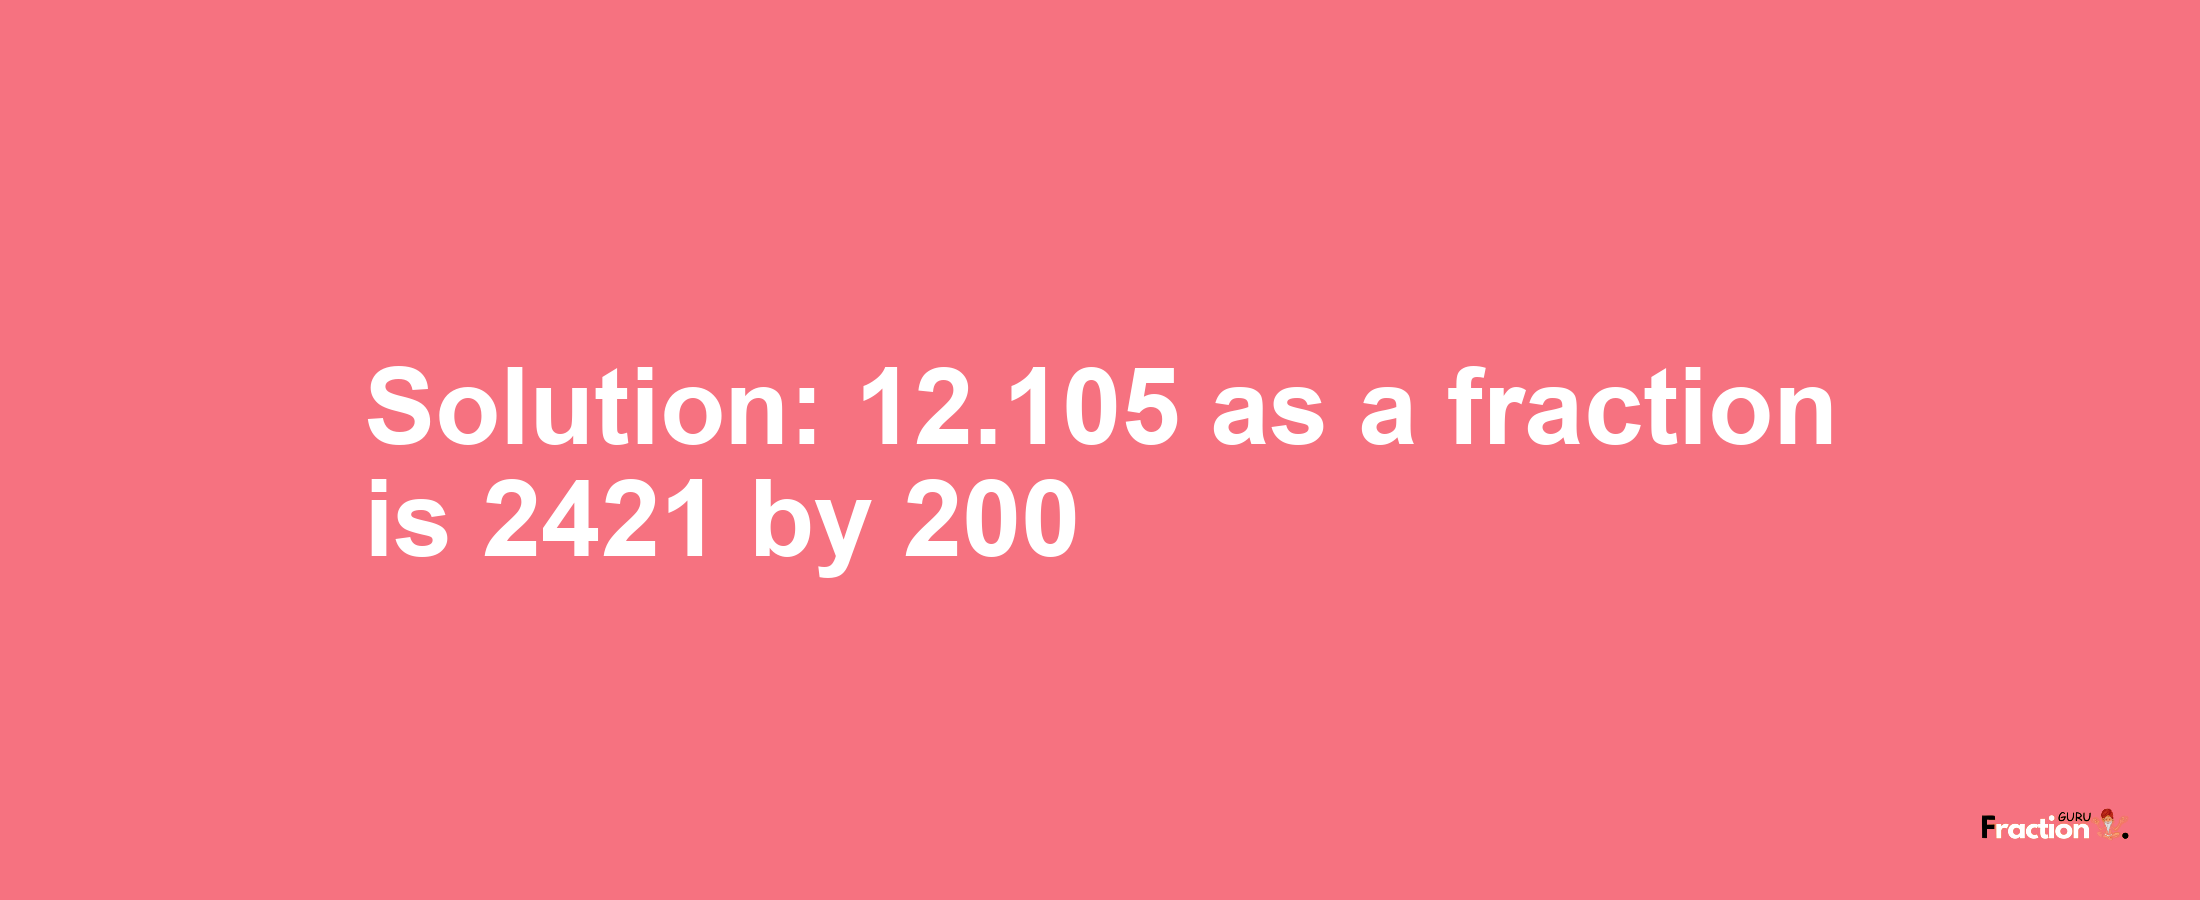 Solution:12.105 as a fraction is 2421/200